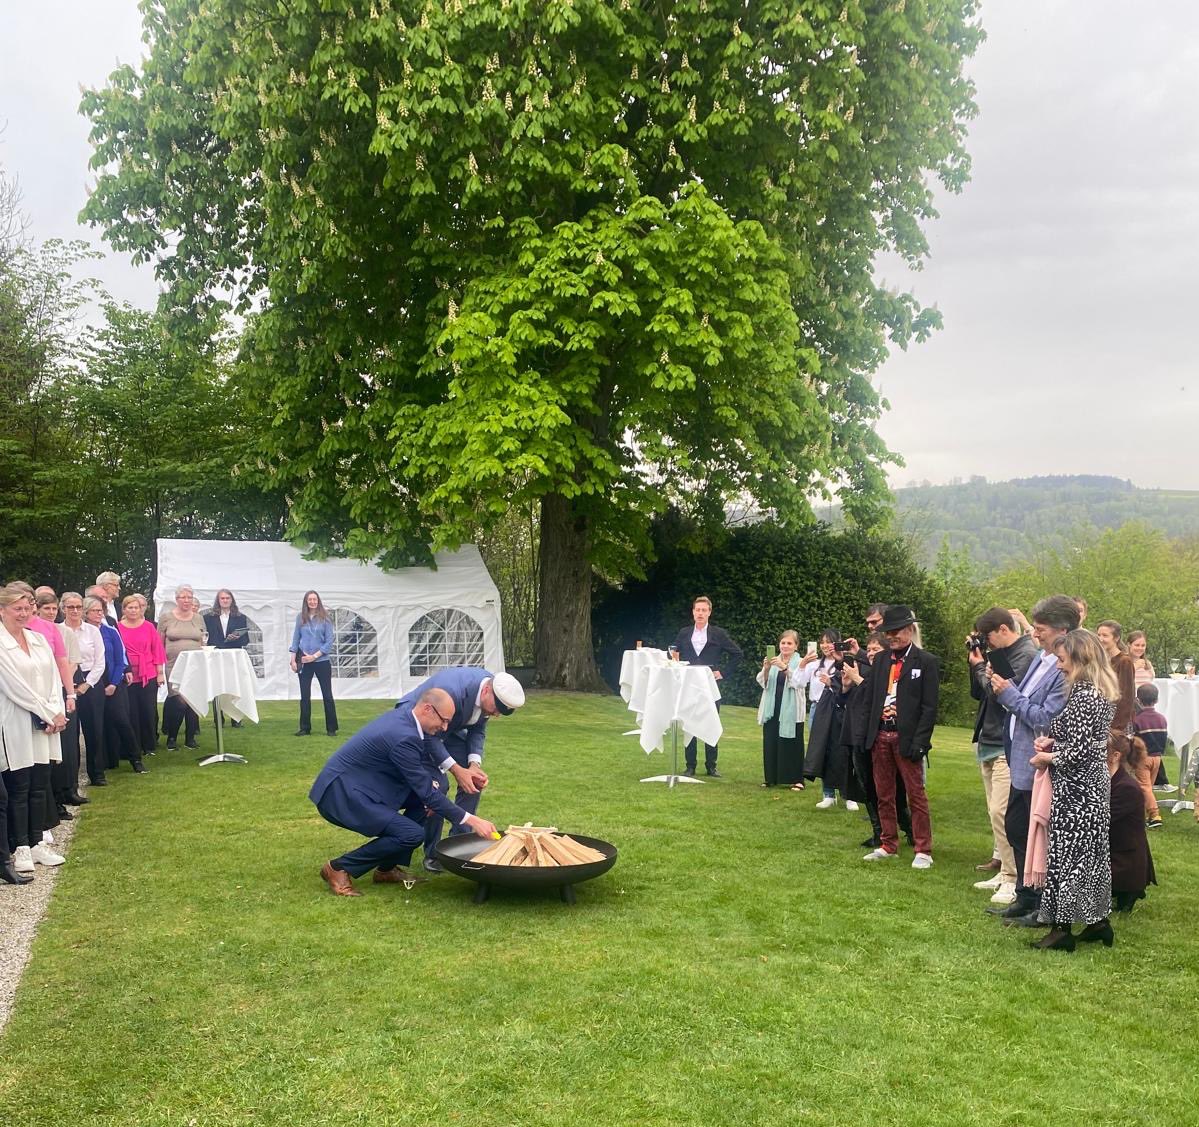 Delighted to celebrate Valborg/Walpurgisnacht at residence w wonderful spring songs performed by 🇸🇪 choir Cappella Catharinae; great cooperation w 🇸🇪 Club of Bern. Big thanks to Nationalrat @martin_candinas, Co-Chair of 🇸🇪🇨🇭Friendship Group for greeting us and lighting the fire!